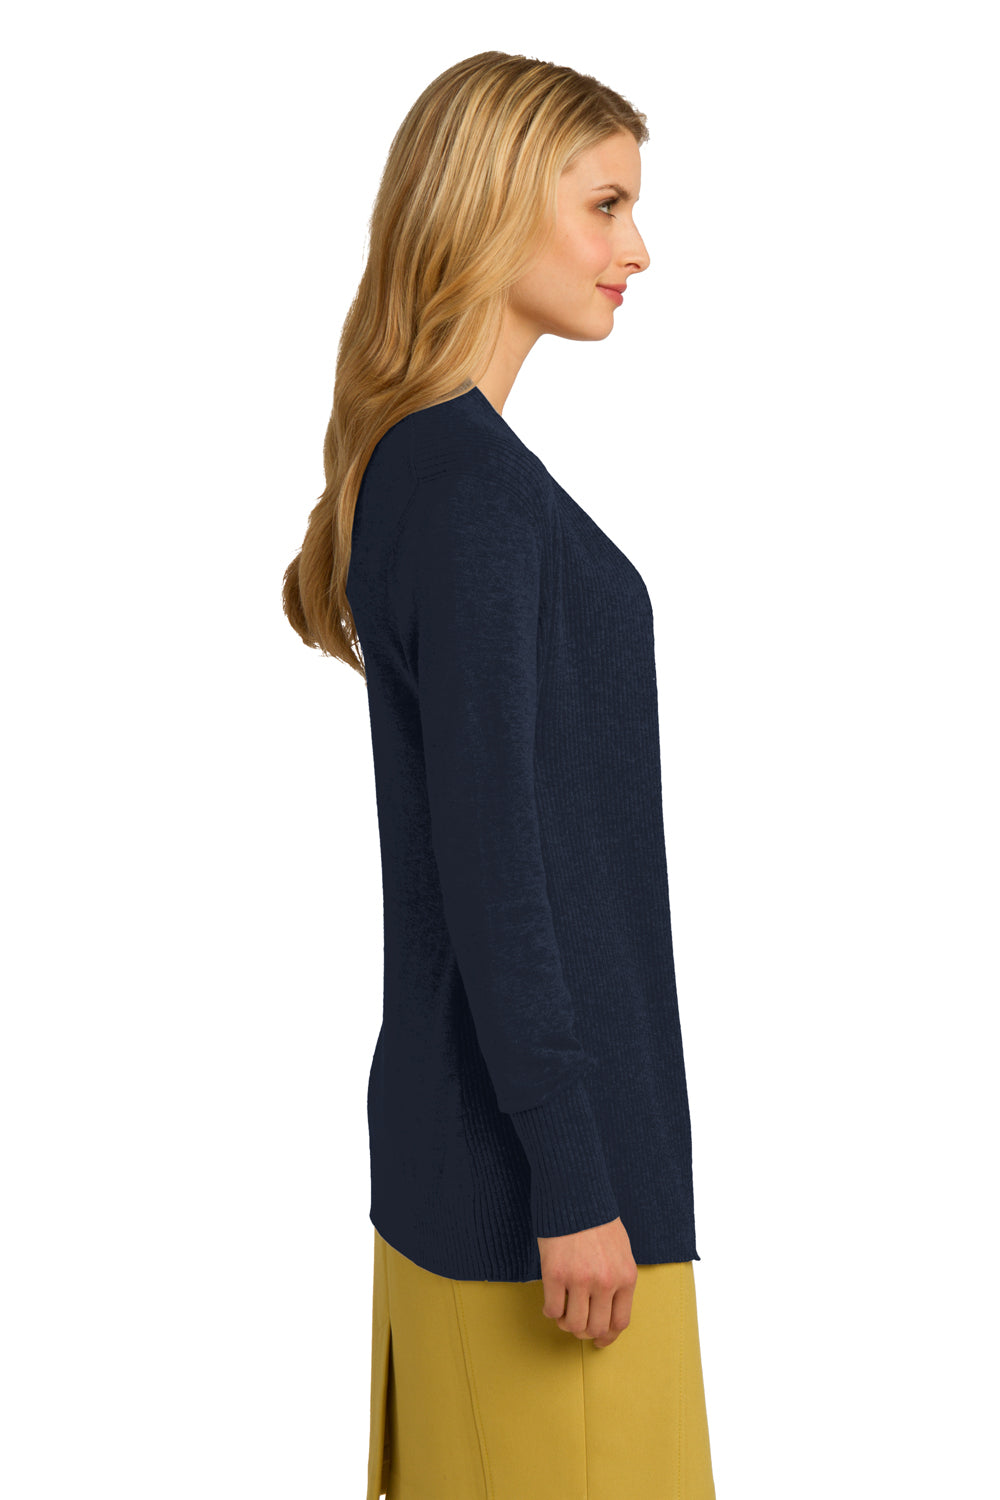 Port Authority LSW289 Womens Long Sleeve Cardigan Sweater Navy Blue Side